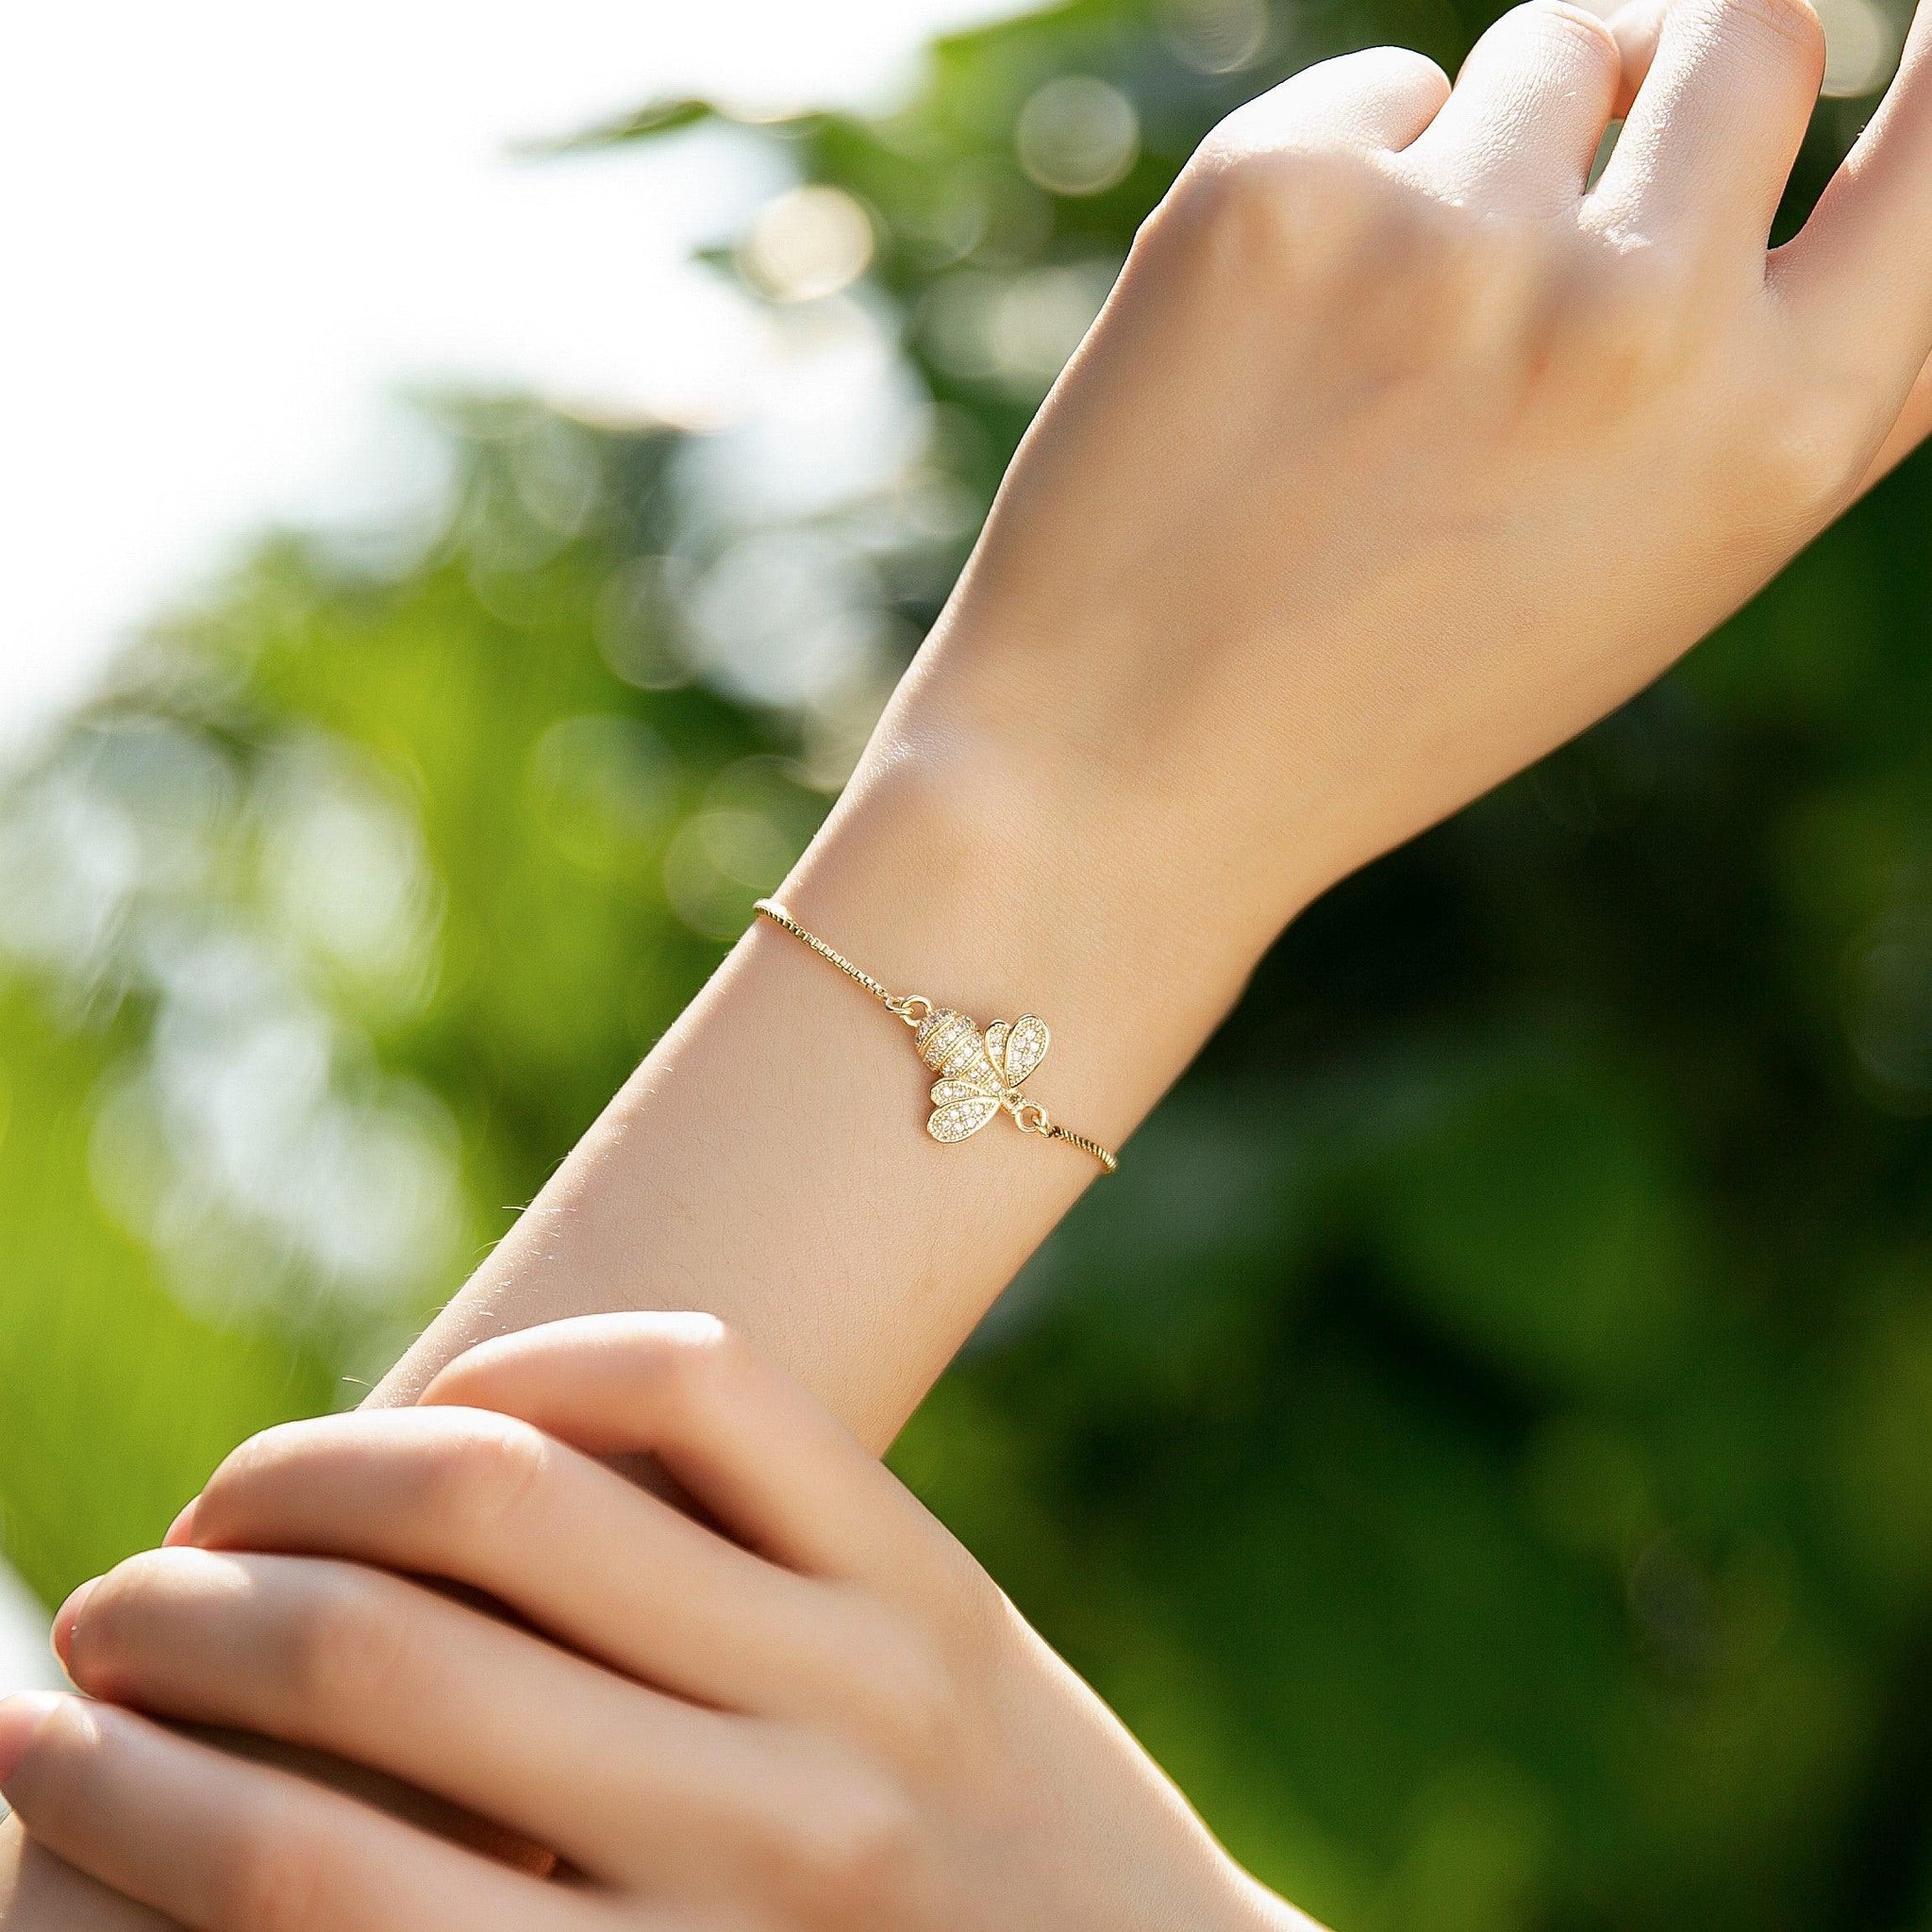 Adopt a Queen - Bee Bracelet - The Project Honey Bees